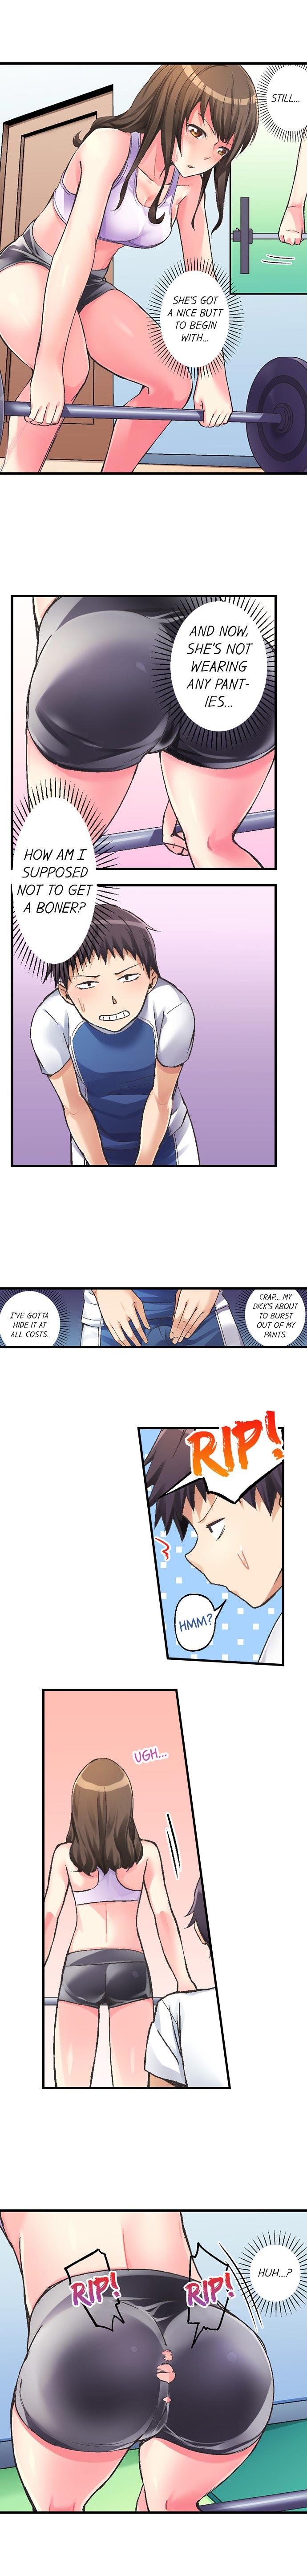 No Panty Booty Workout! Ch. 1 - 15 16